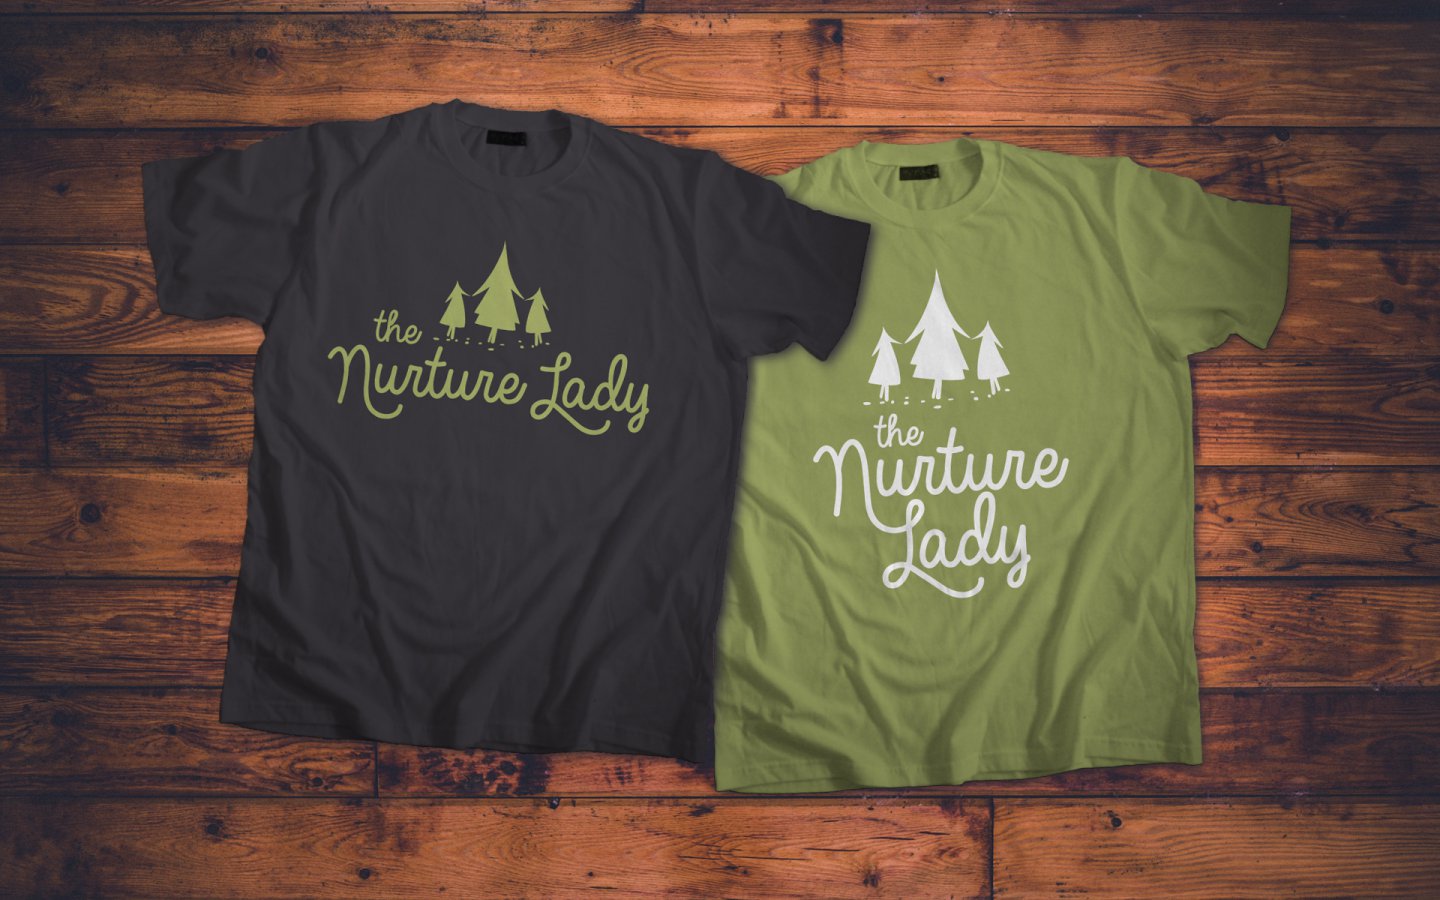 The Nurture Lady, Brand Colours and T-Shirts